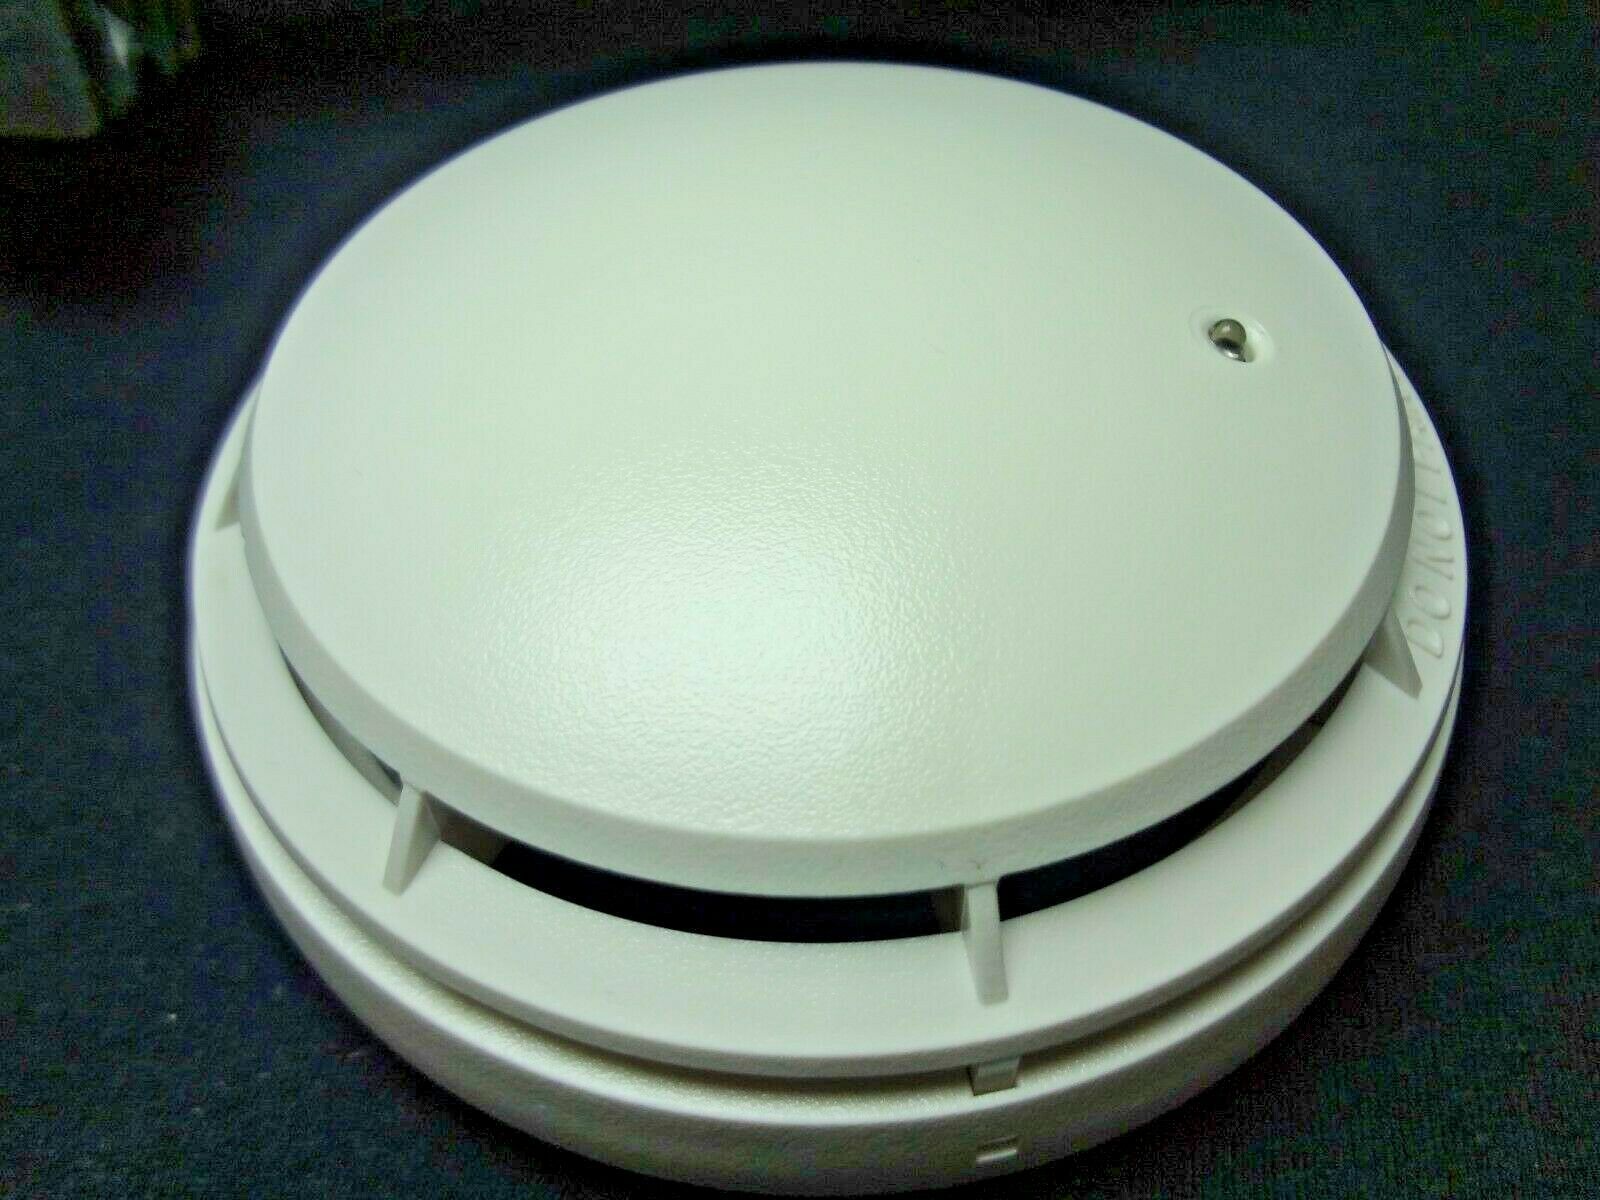 Simplex 4098-9601 Photoelectric Smoke Detector Head +300 Avail Free Shipping !!!